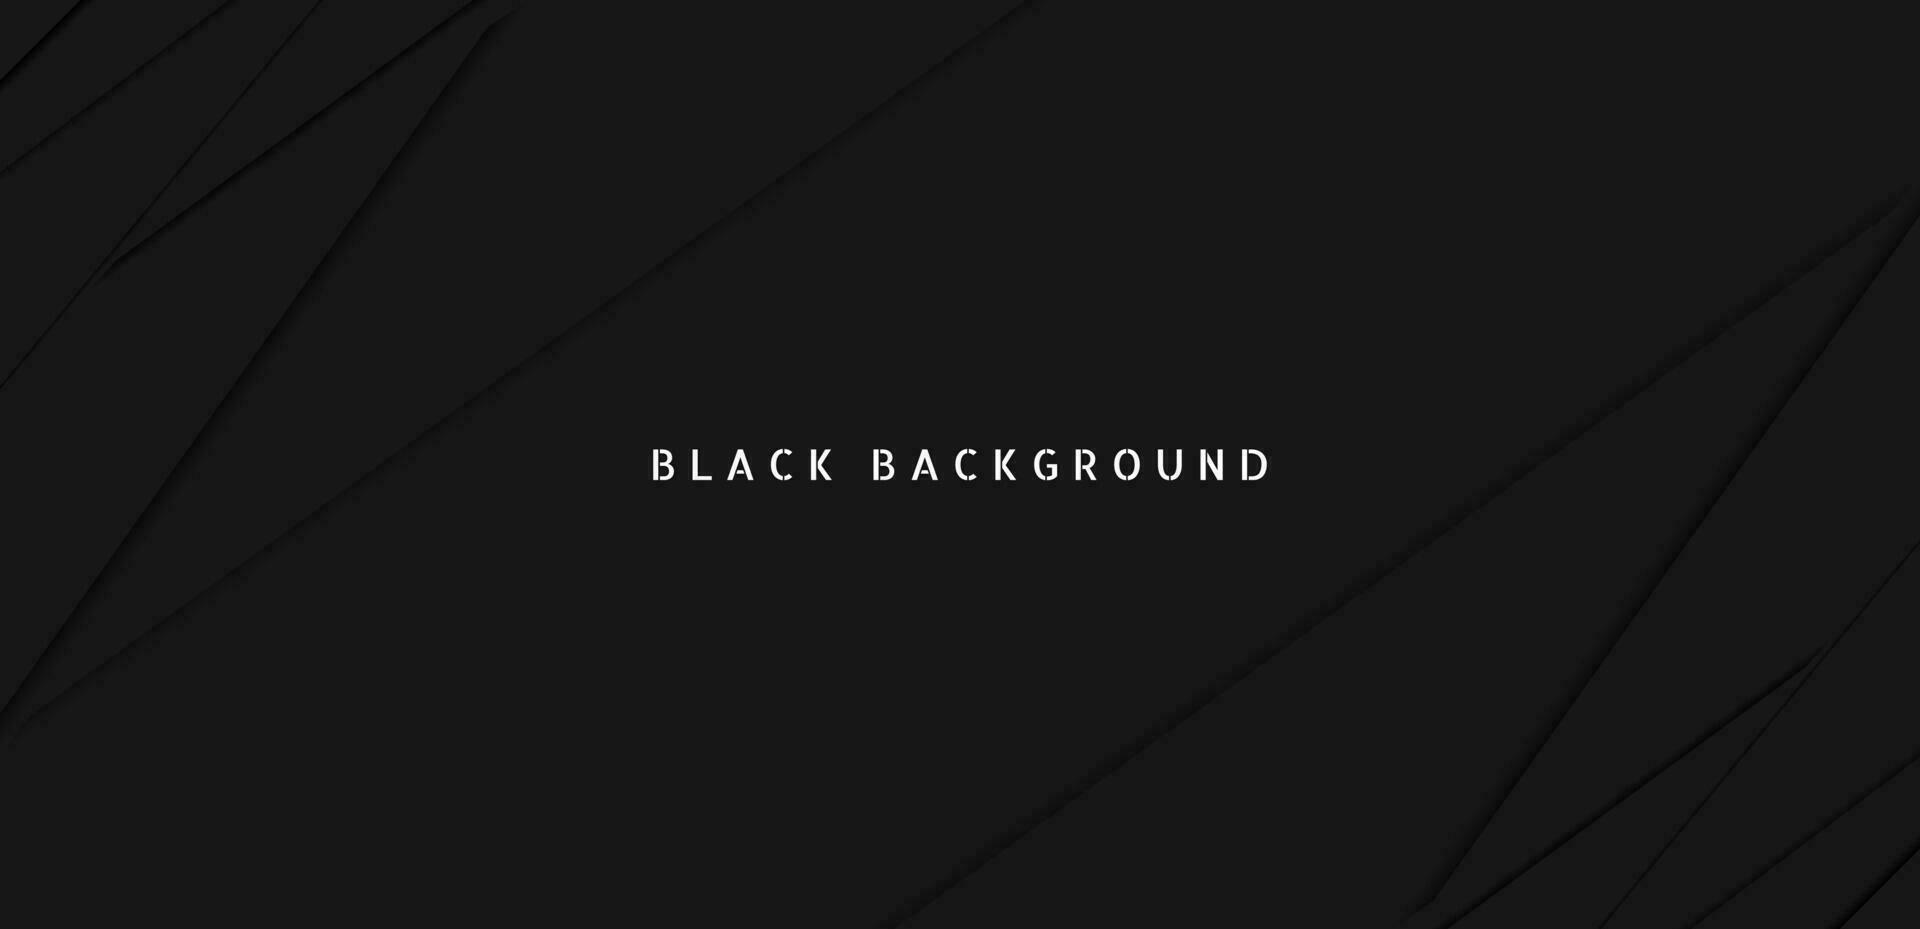 Black premium abstract background with dark geometric shapes. Very suitable for poster, banner, cover, advertisement, wallpaper and futuristic design concept vector